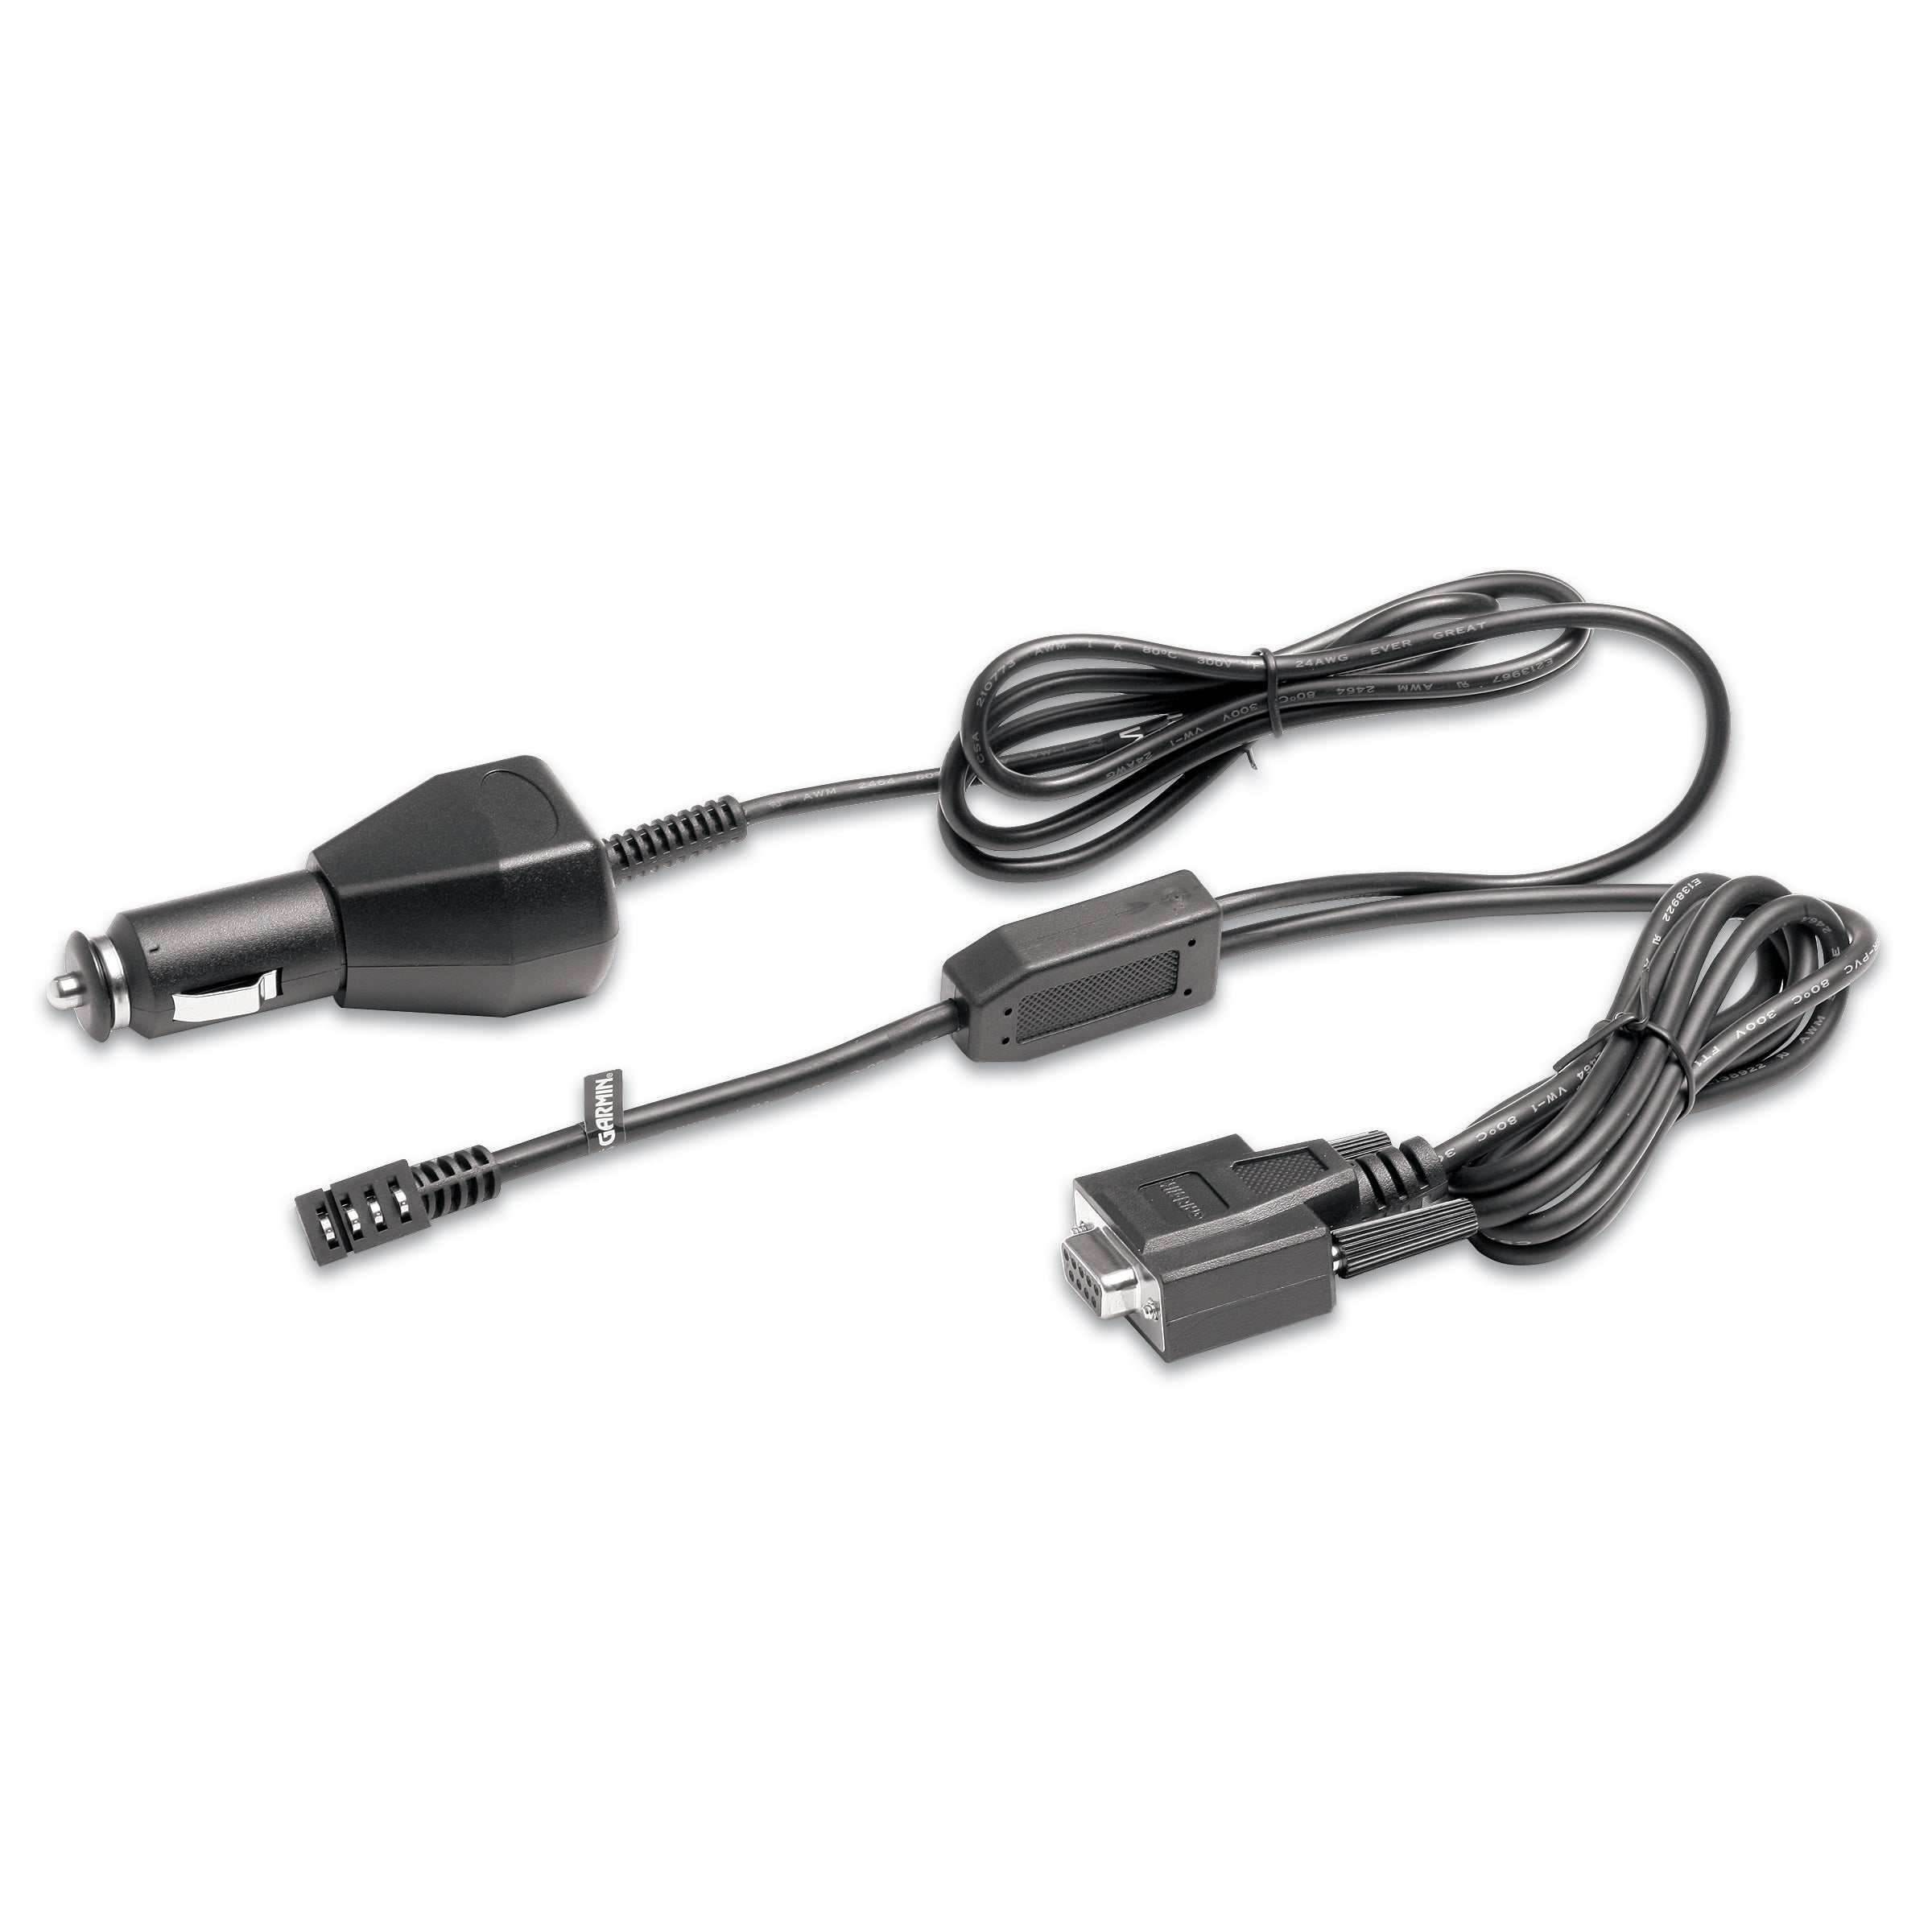 Garmin Vehicle Power Cable with PC Interface